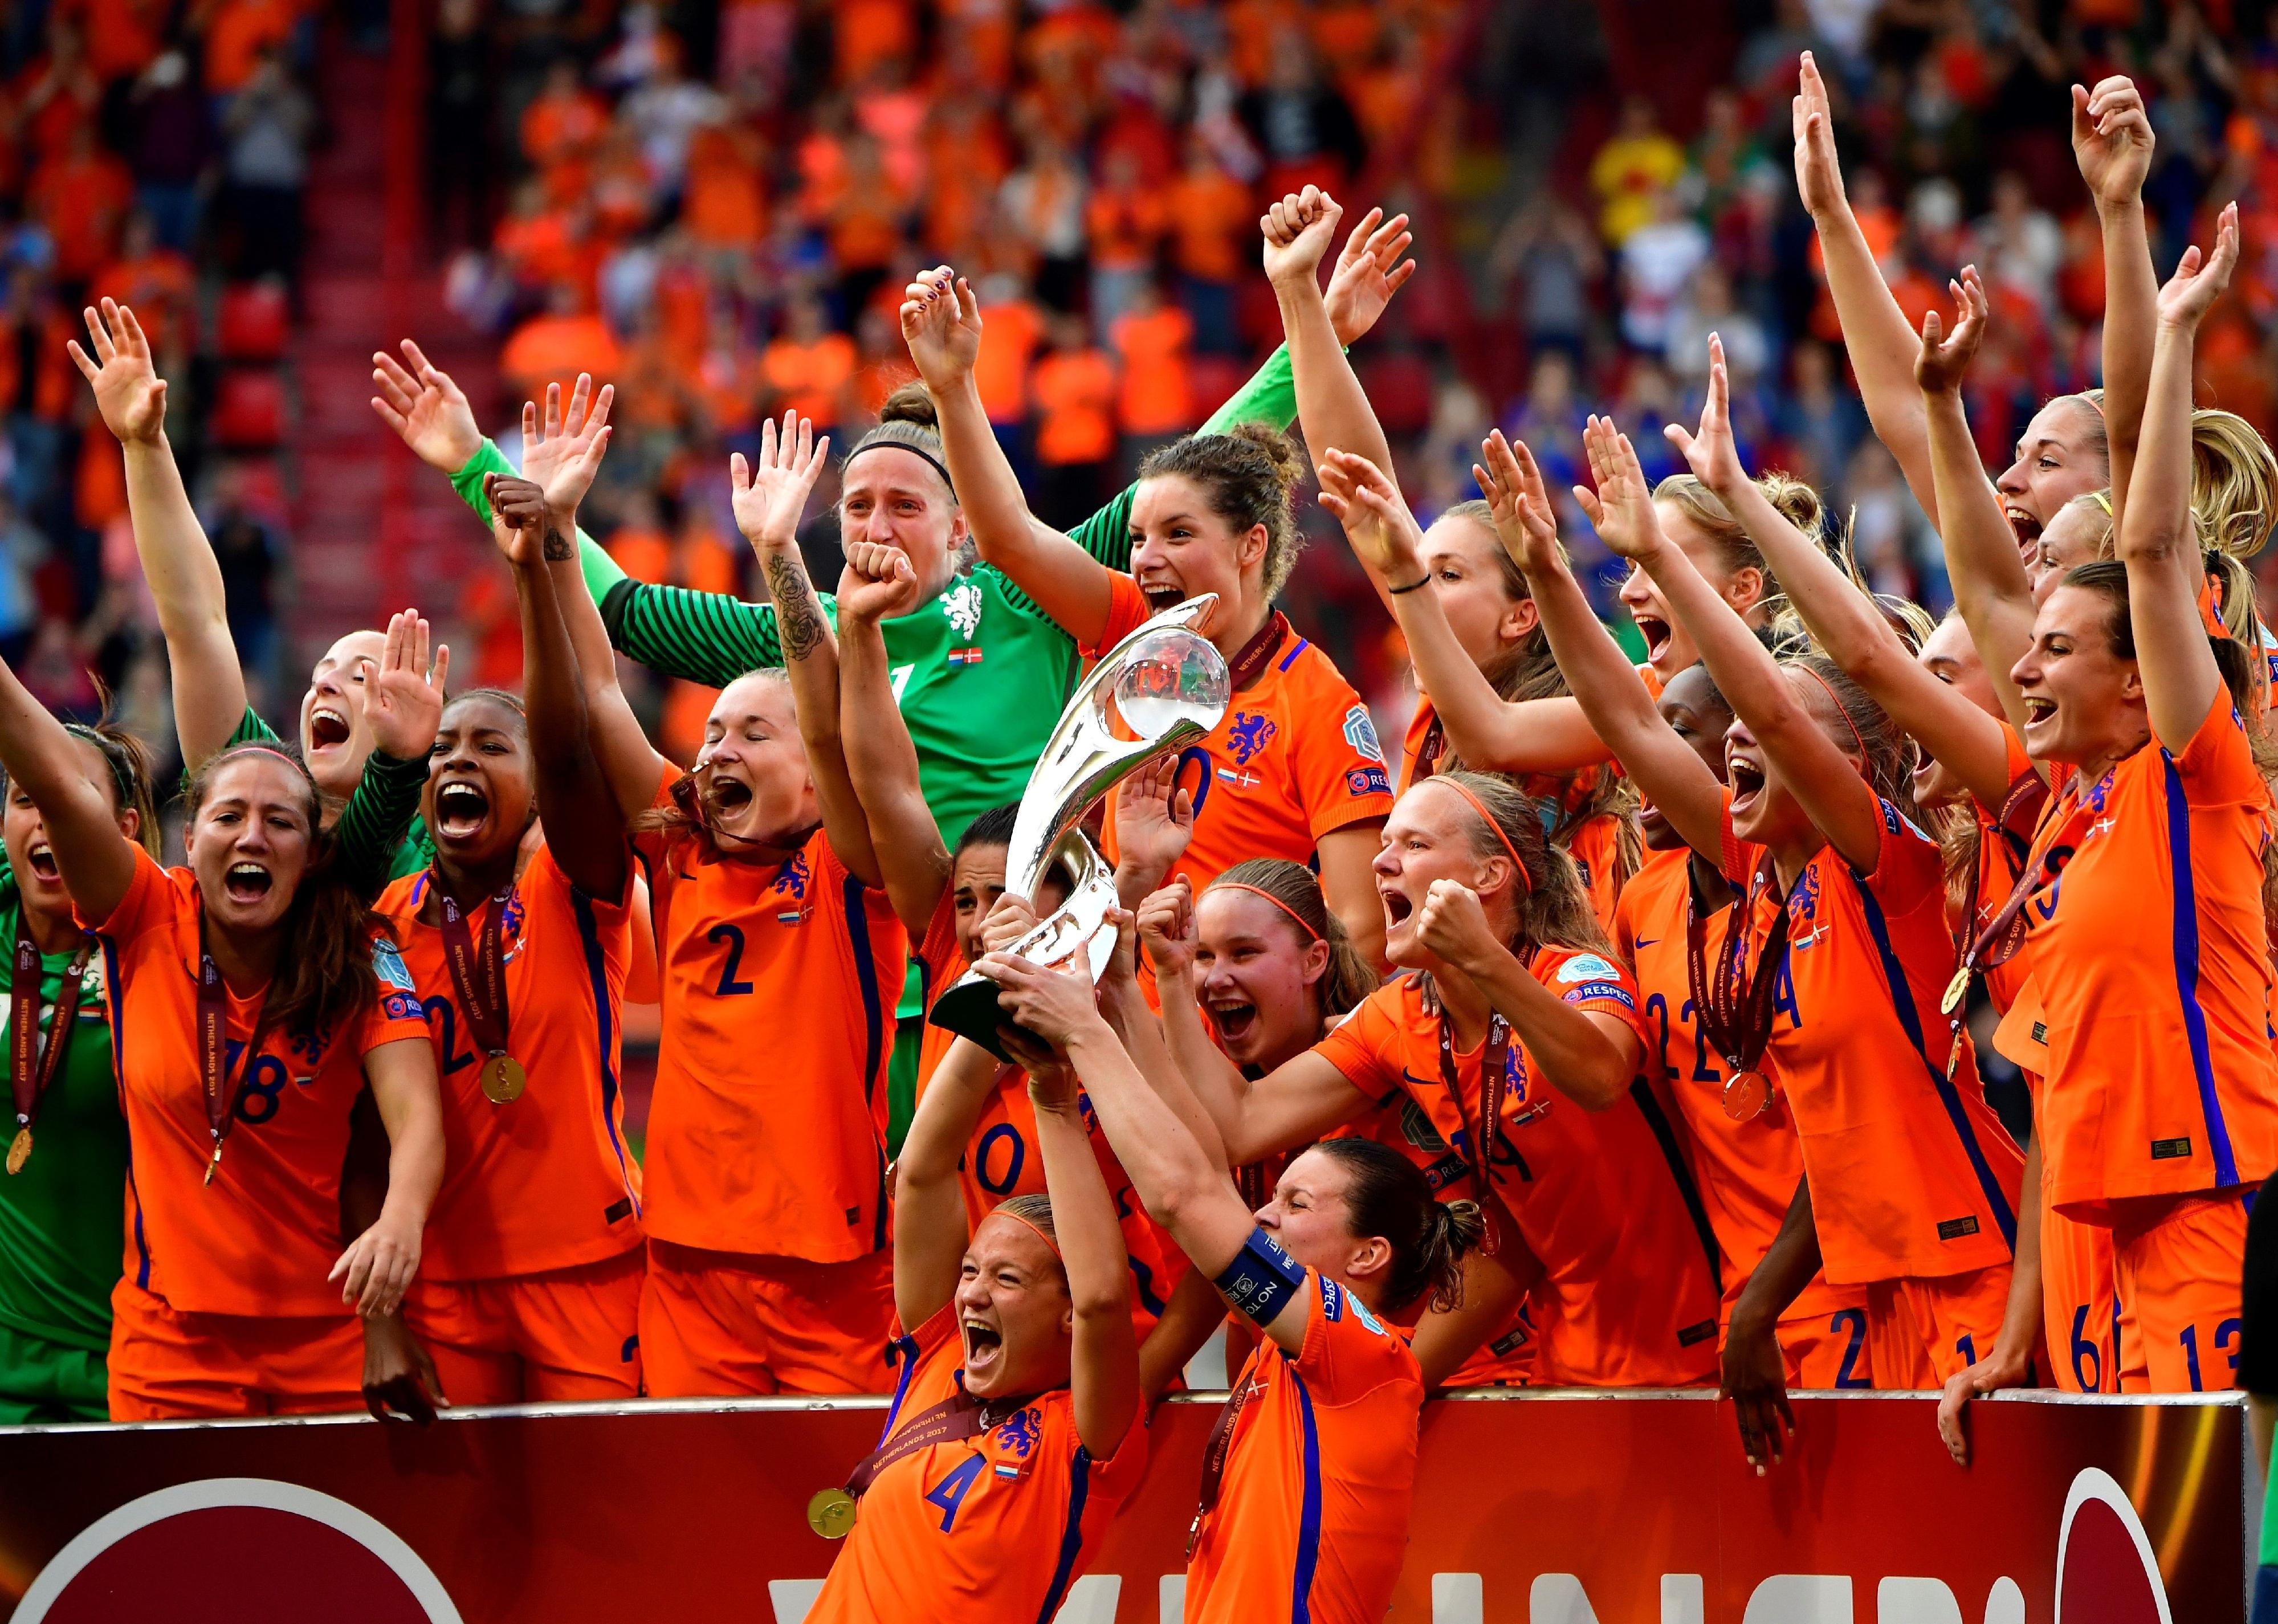 Netherlands' team players celebrate with the trophy after winning the UEFA Womens Euro 2017 football tournament final match.